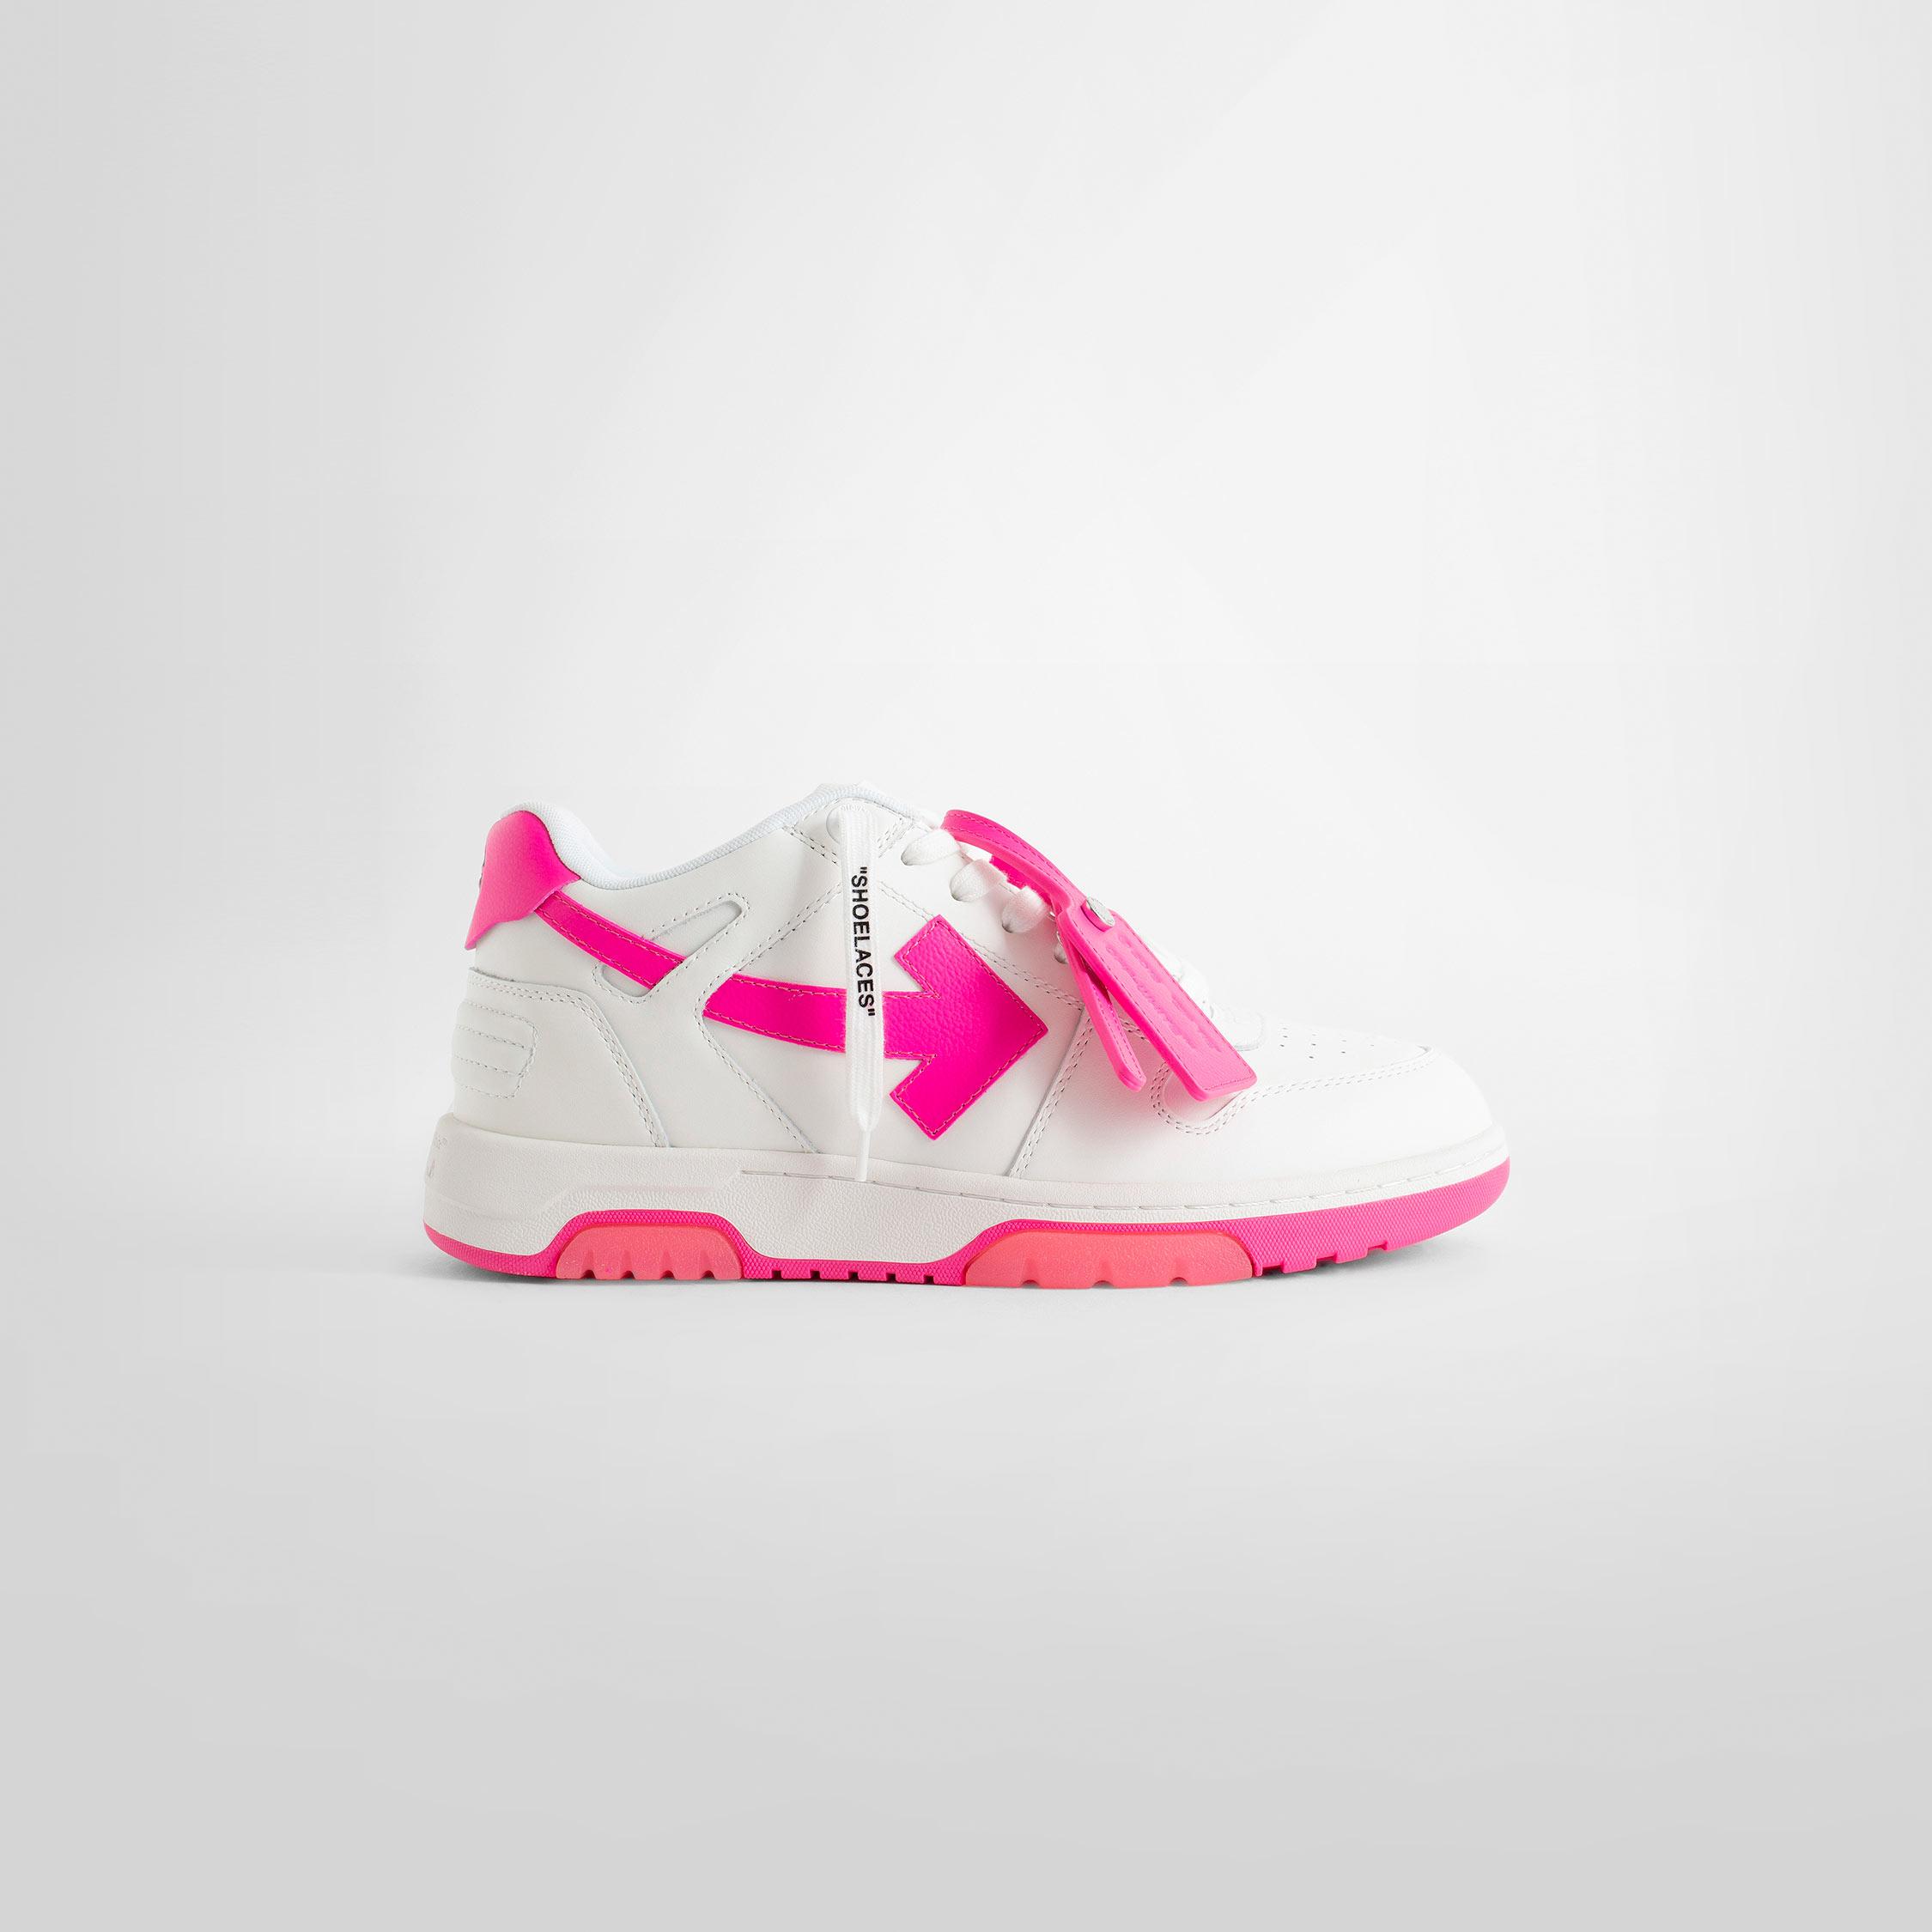 Off-White c/o Virgil Abloh Sneakers in Pink | Lyst